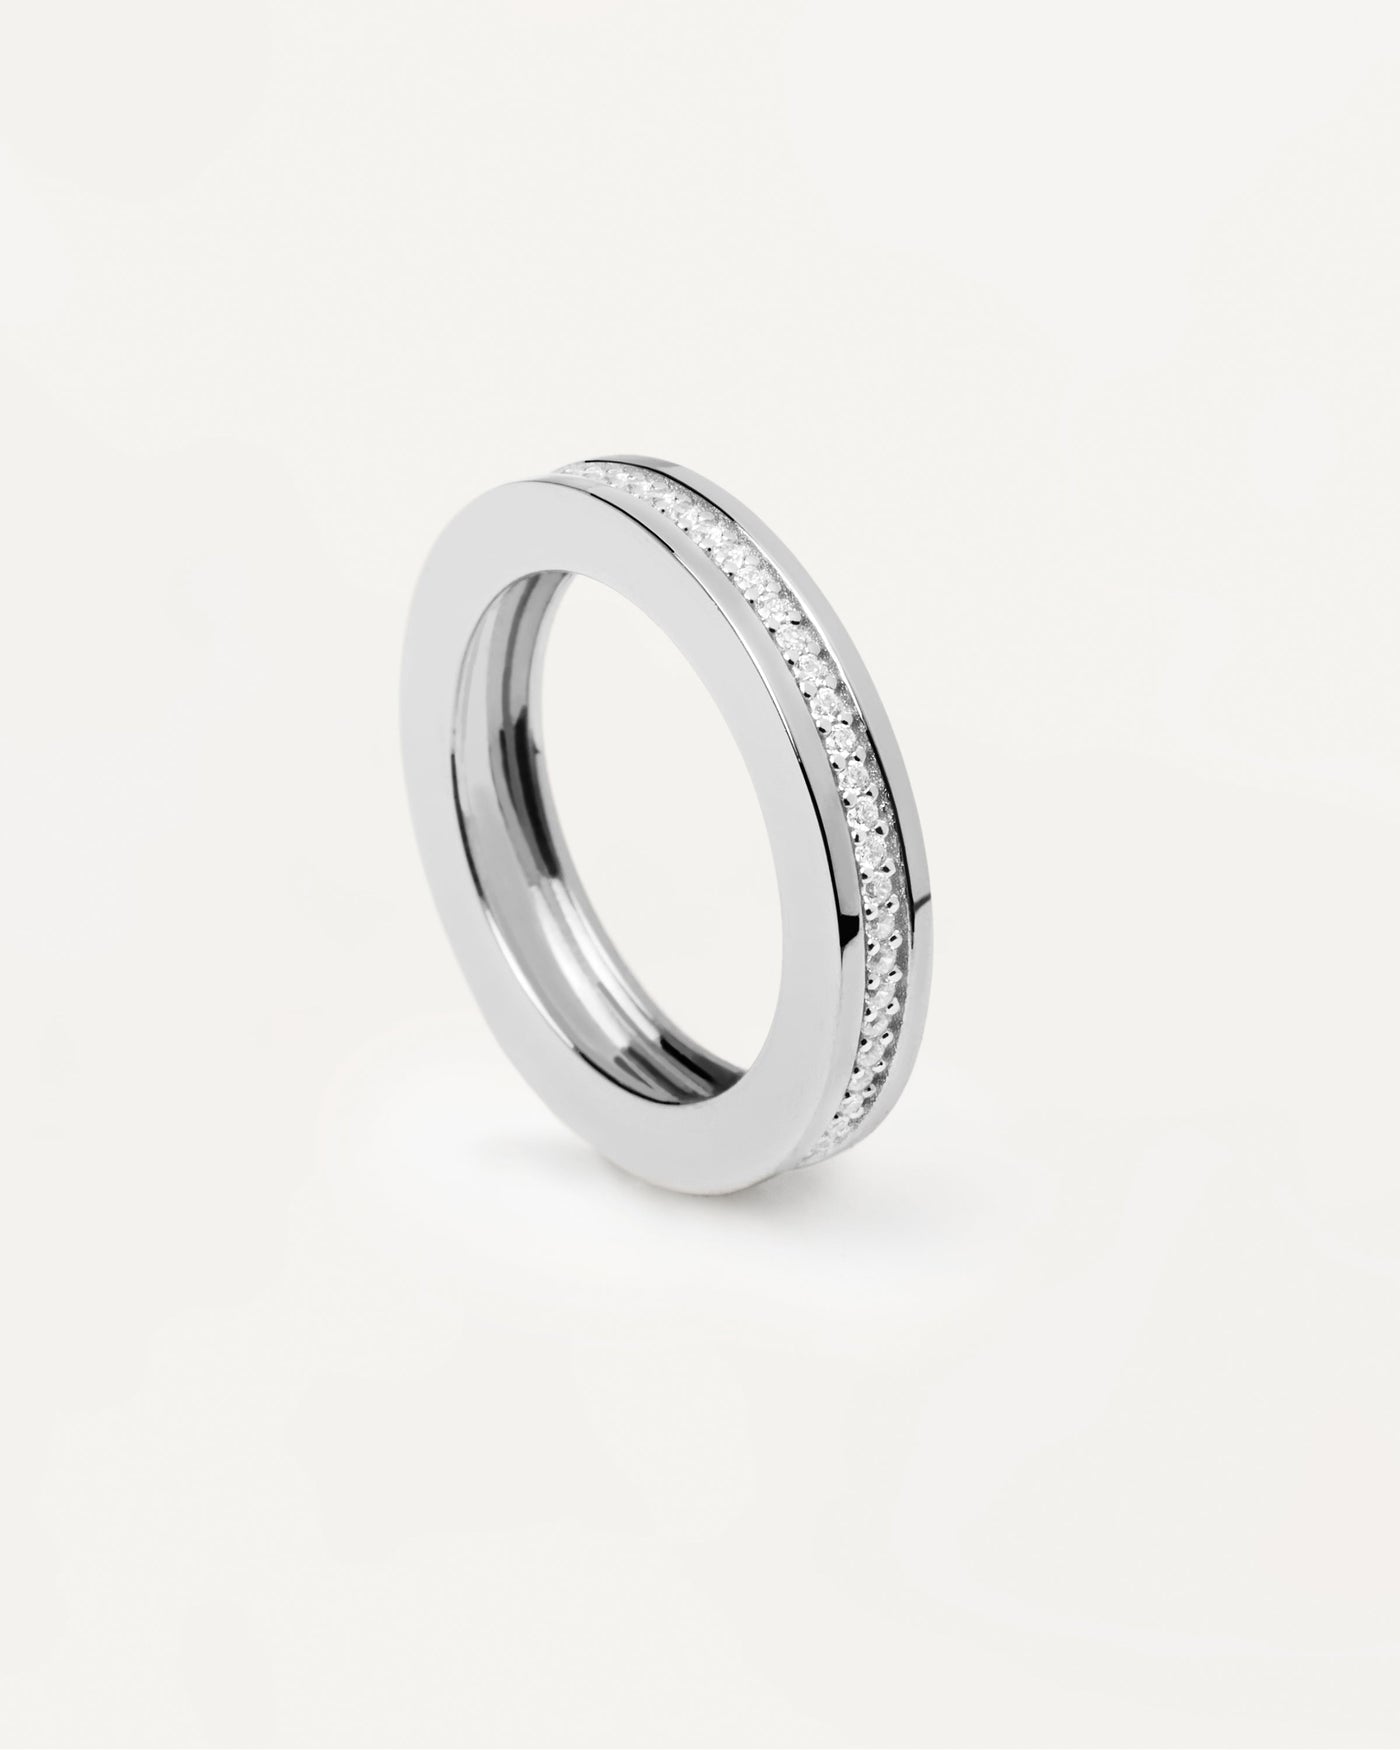 2023 Selection | Infinity Silver Ring. Sterling silver eternity ring in disc shape. Get the latest arrival from PDPAOLA. Place your order safely and get this Best Seller. Free Shipping.